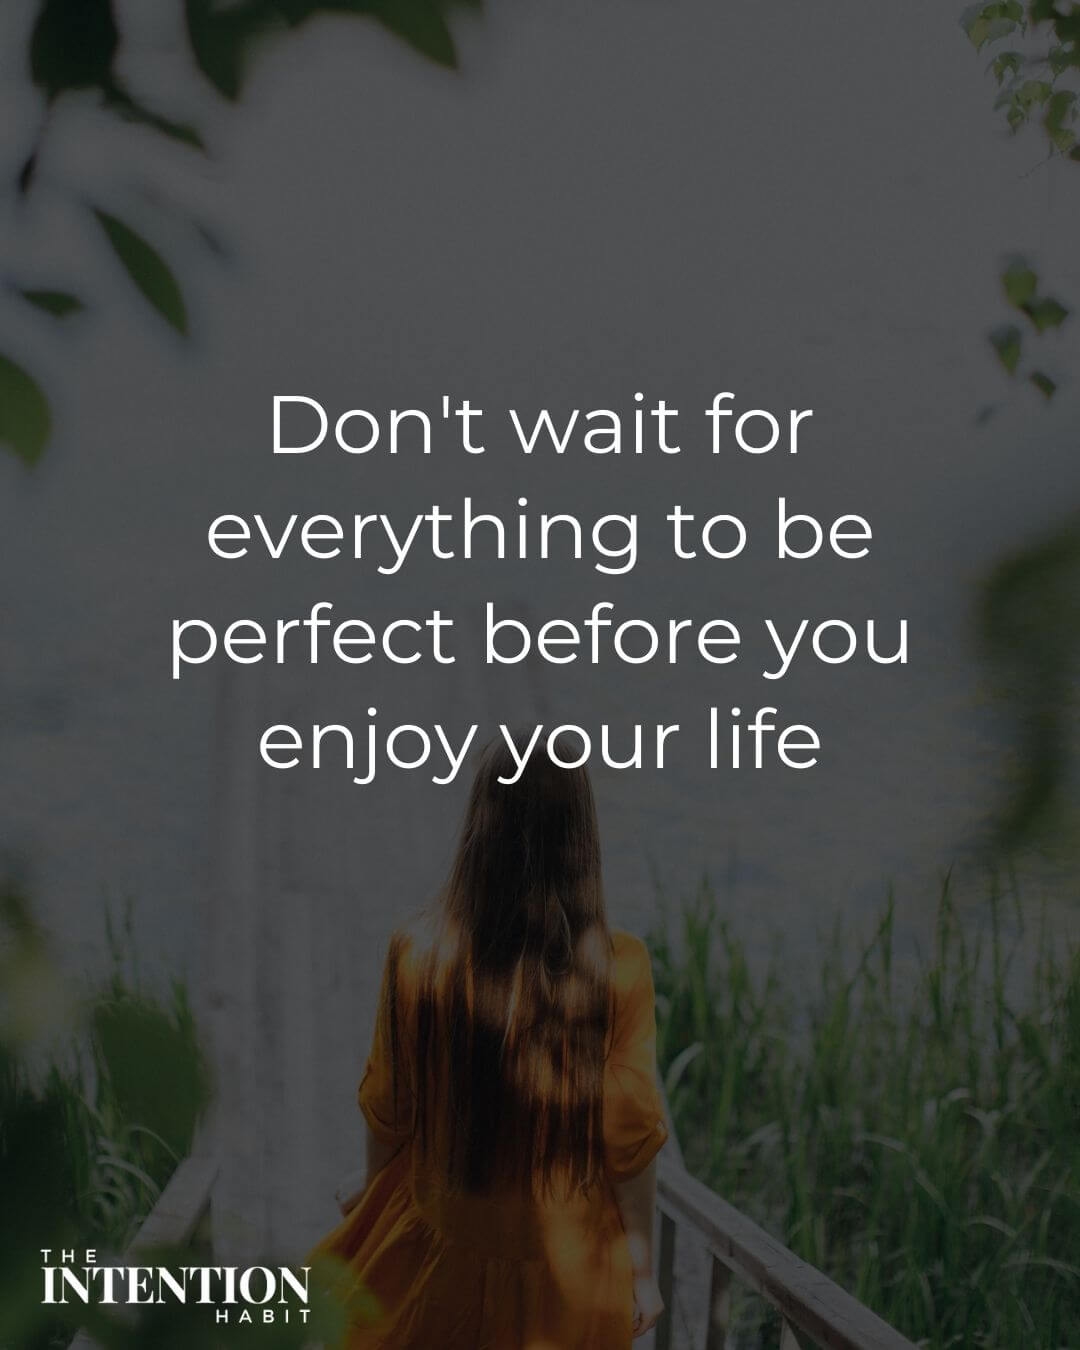 Intentional living quote - Don't wait for everything to be perfect before you enjoy your life